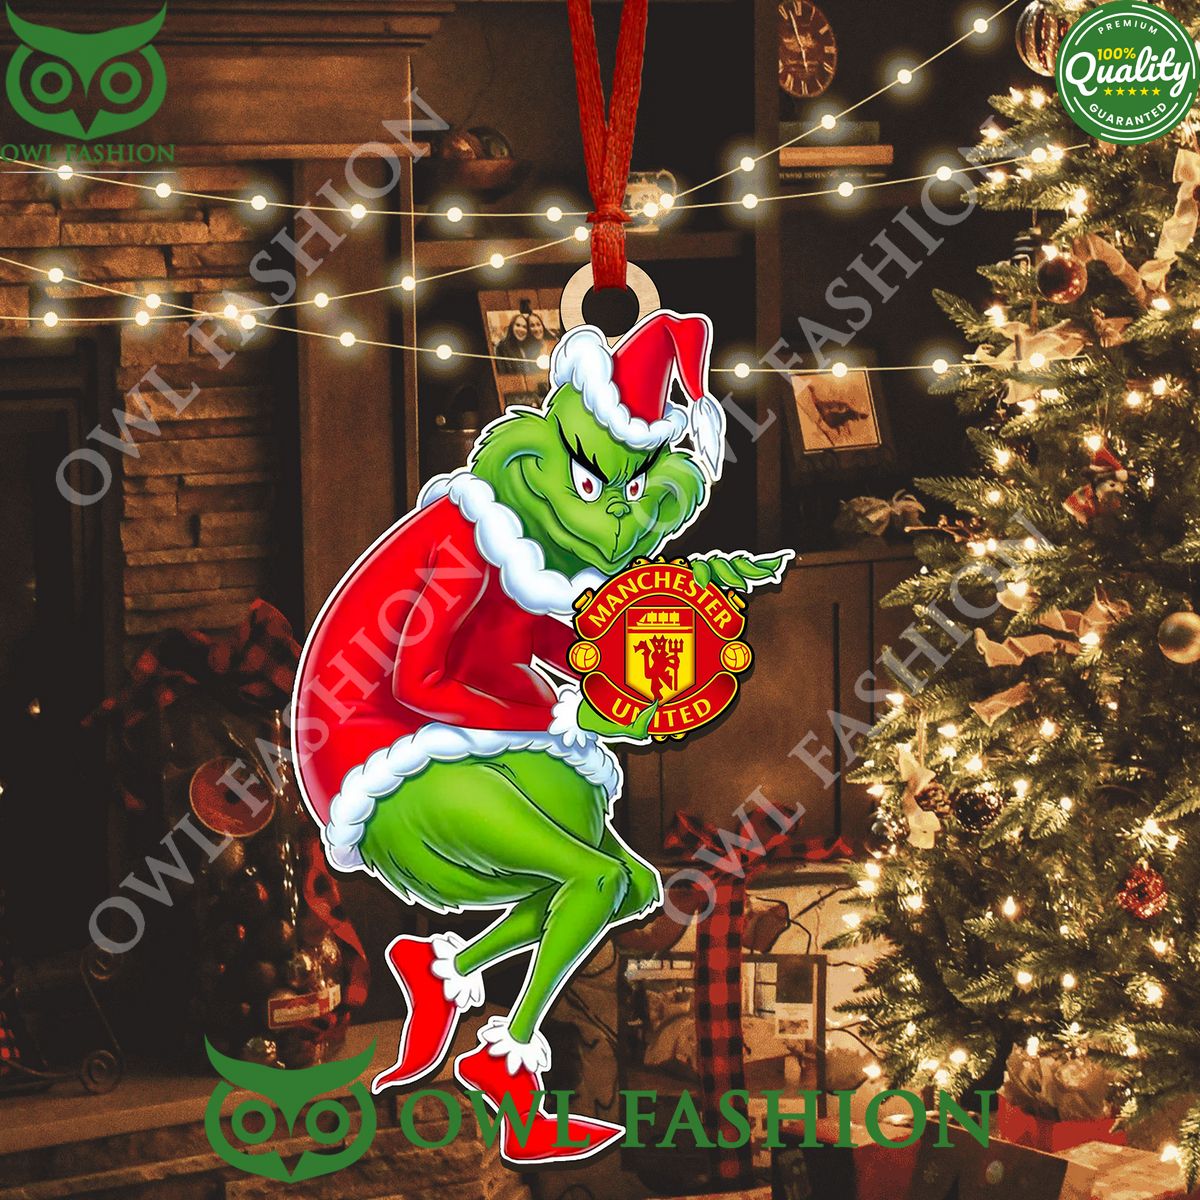 Manchester United Grinch Hug 2 Side Printed Ornament Natural and awesome